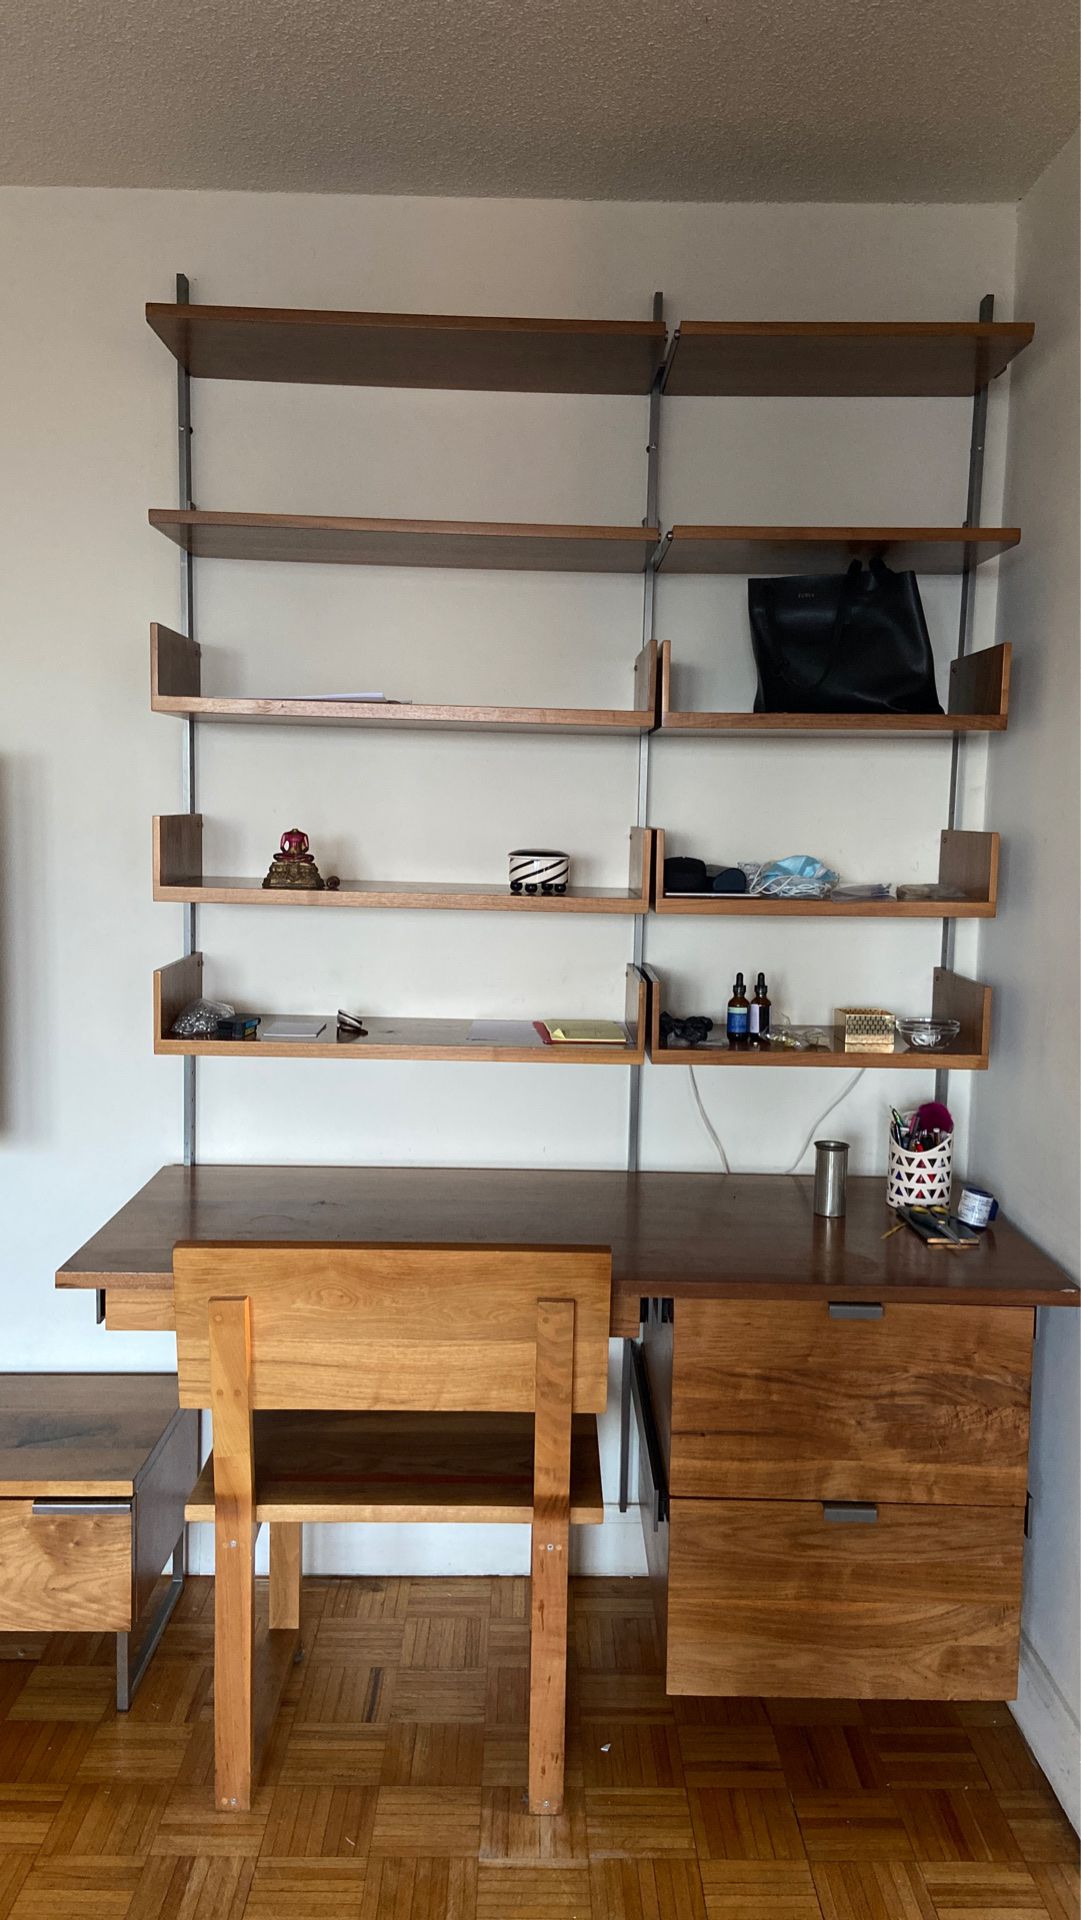 Hanging bookshelf with desk and TV stand set